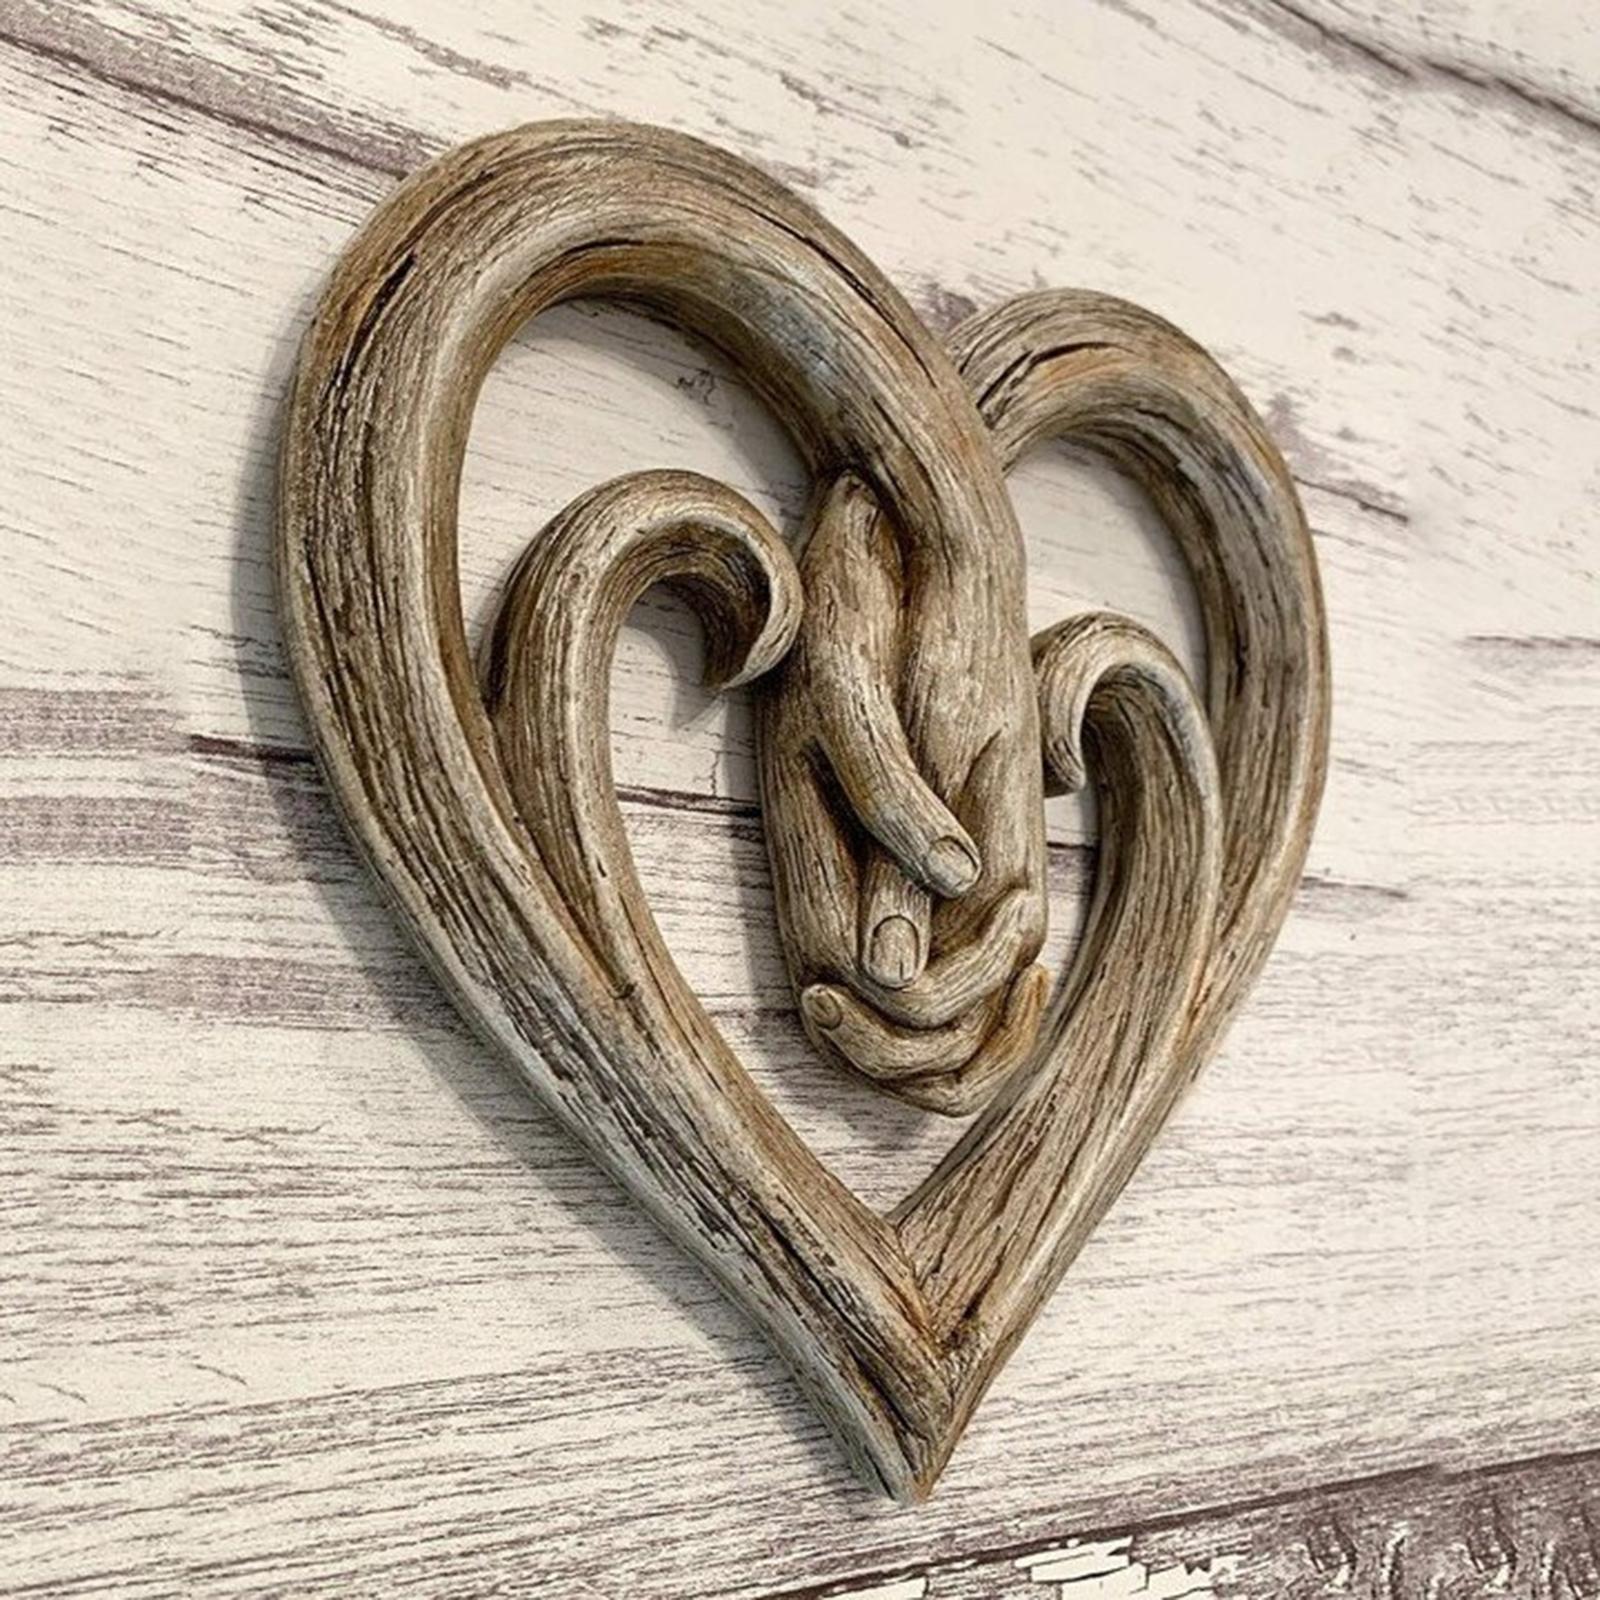 Handcrafted Wooden Hanging Wall Decor Plaque Love Sculpture Decoration